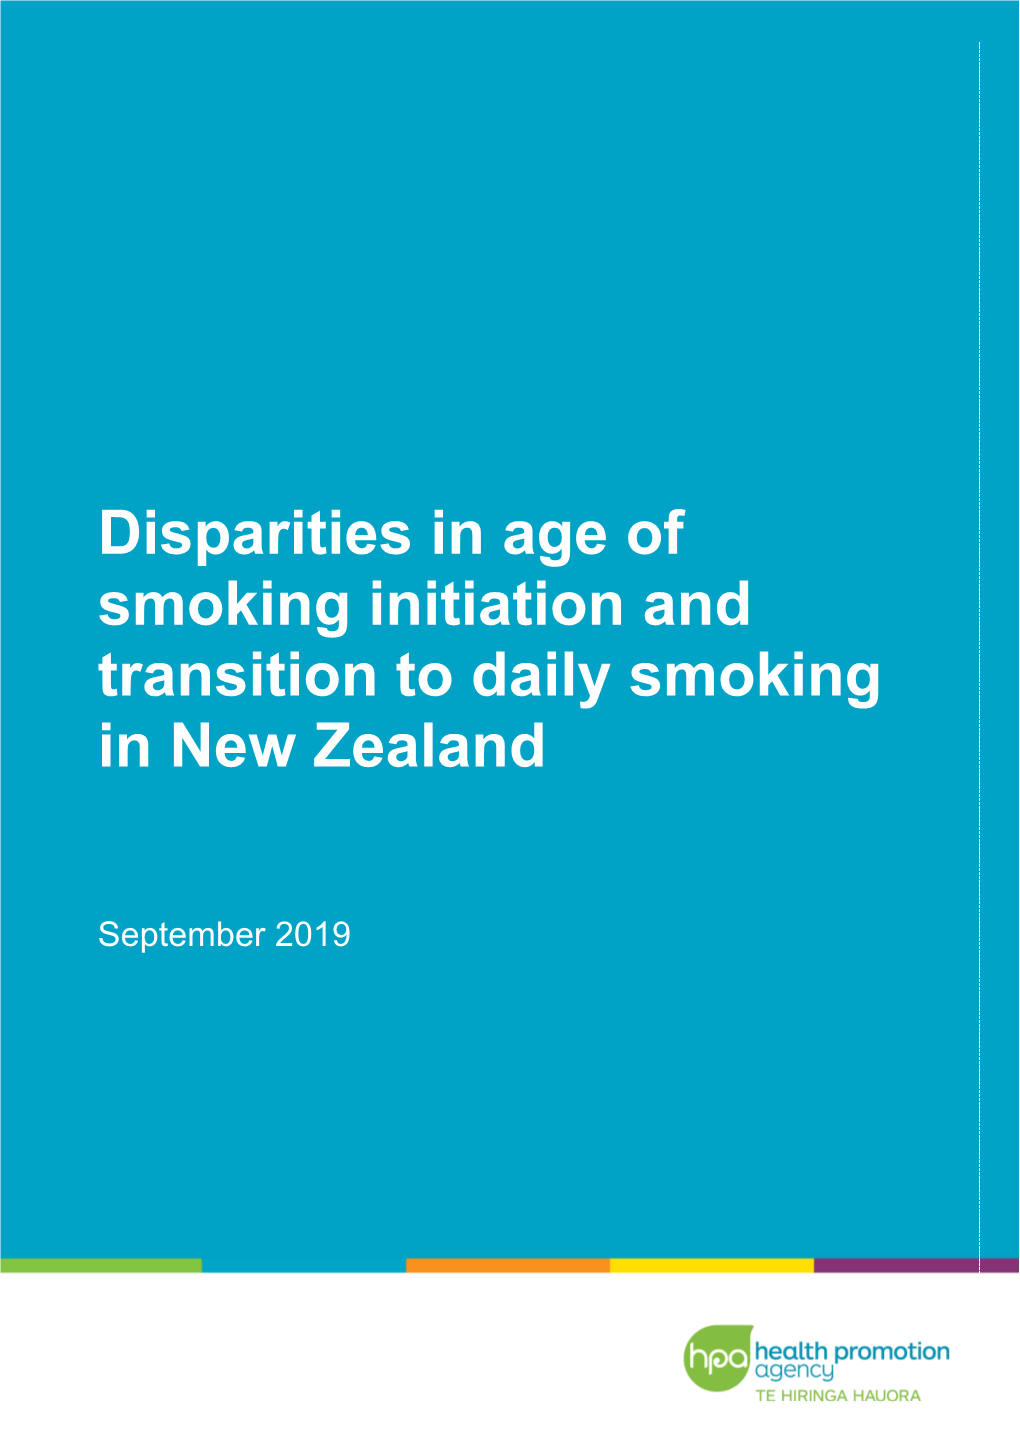 Disparities in Age of Smoking Initiation and Transition to Daily Smoking in New Zealand